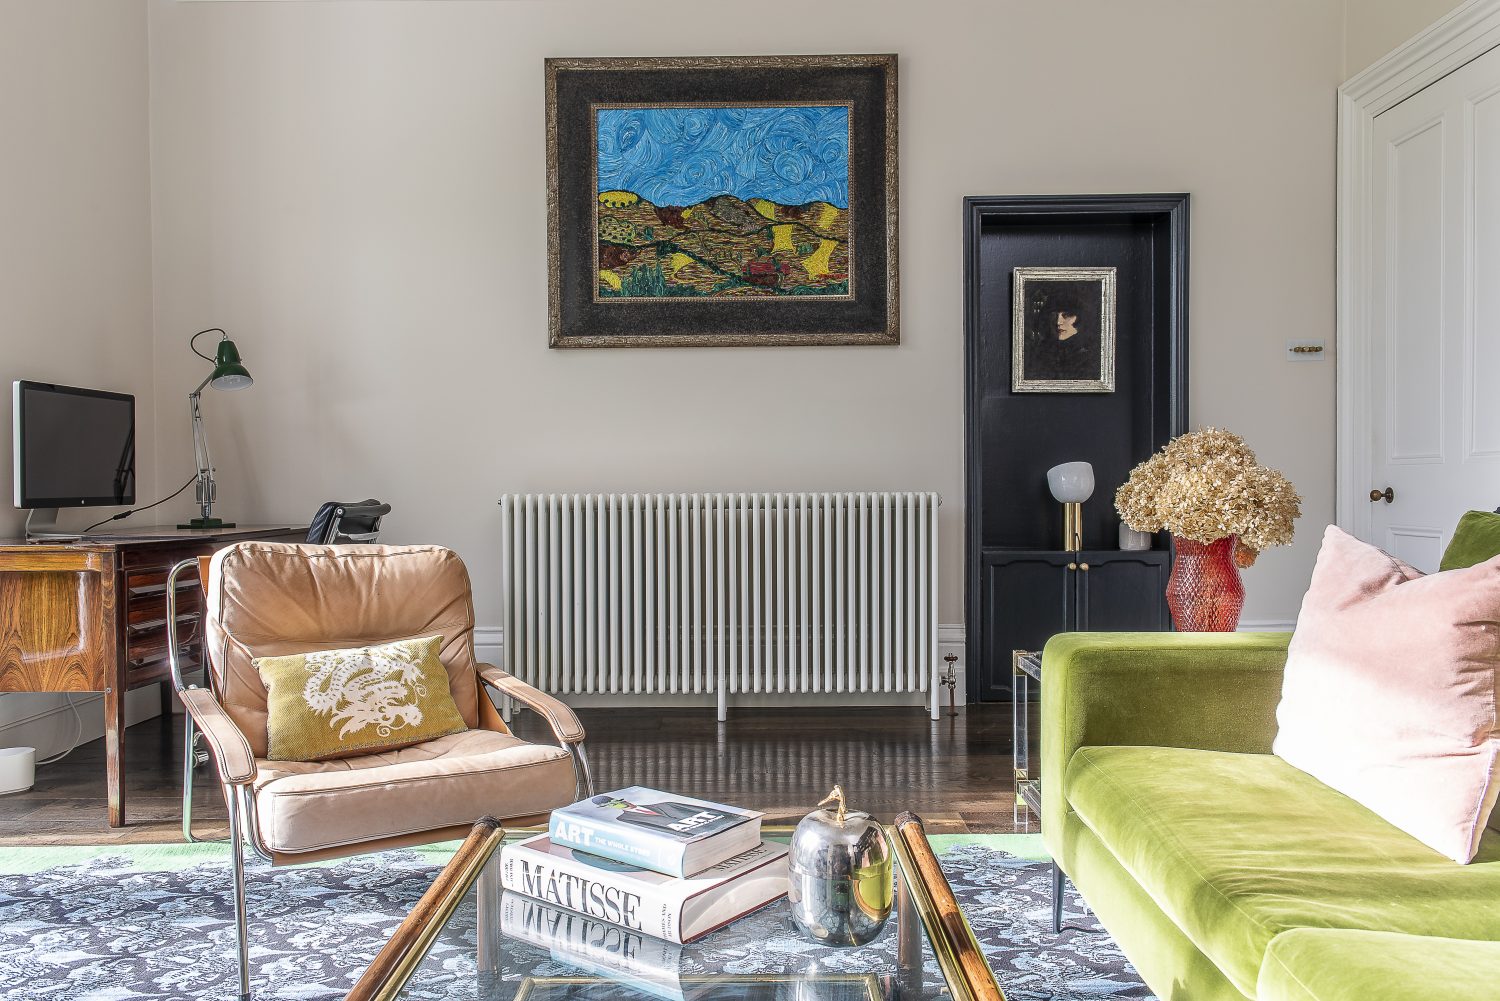 The focus in Olya’s husband’s study is a piece by the artist Louis Midavaine, a copy of one of Toulouse Lautrec’s Moulin Rouge paintings from the 19th century. A rug from The Rug Company and a bright green Conran velvet sofa compliment the painting’s palette